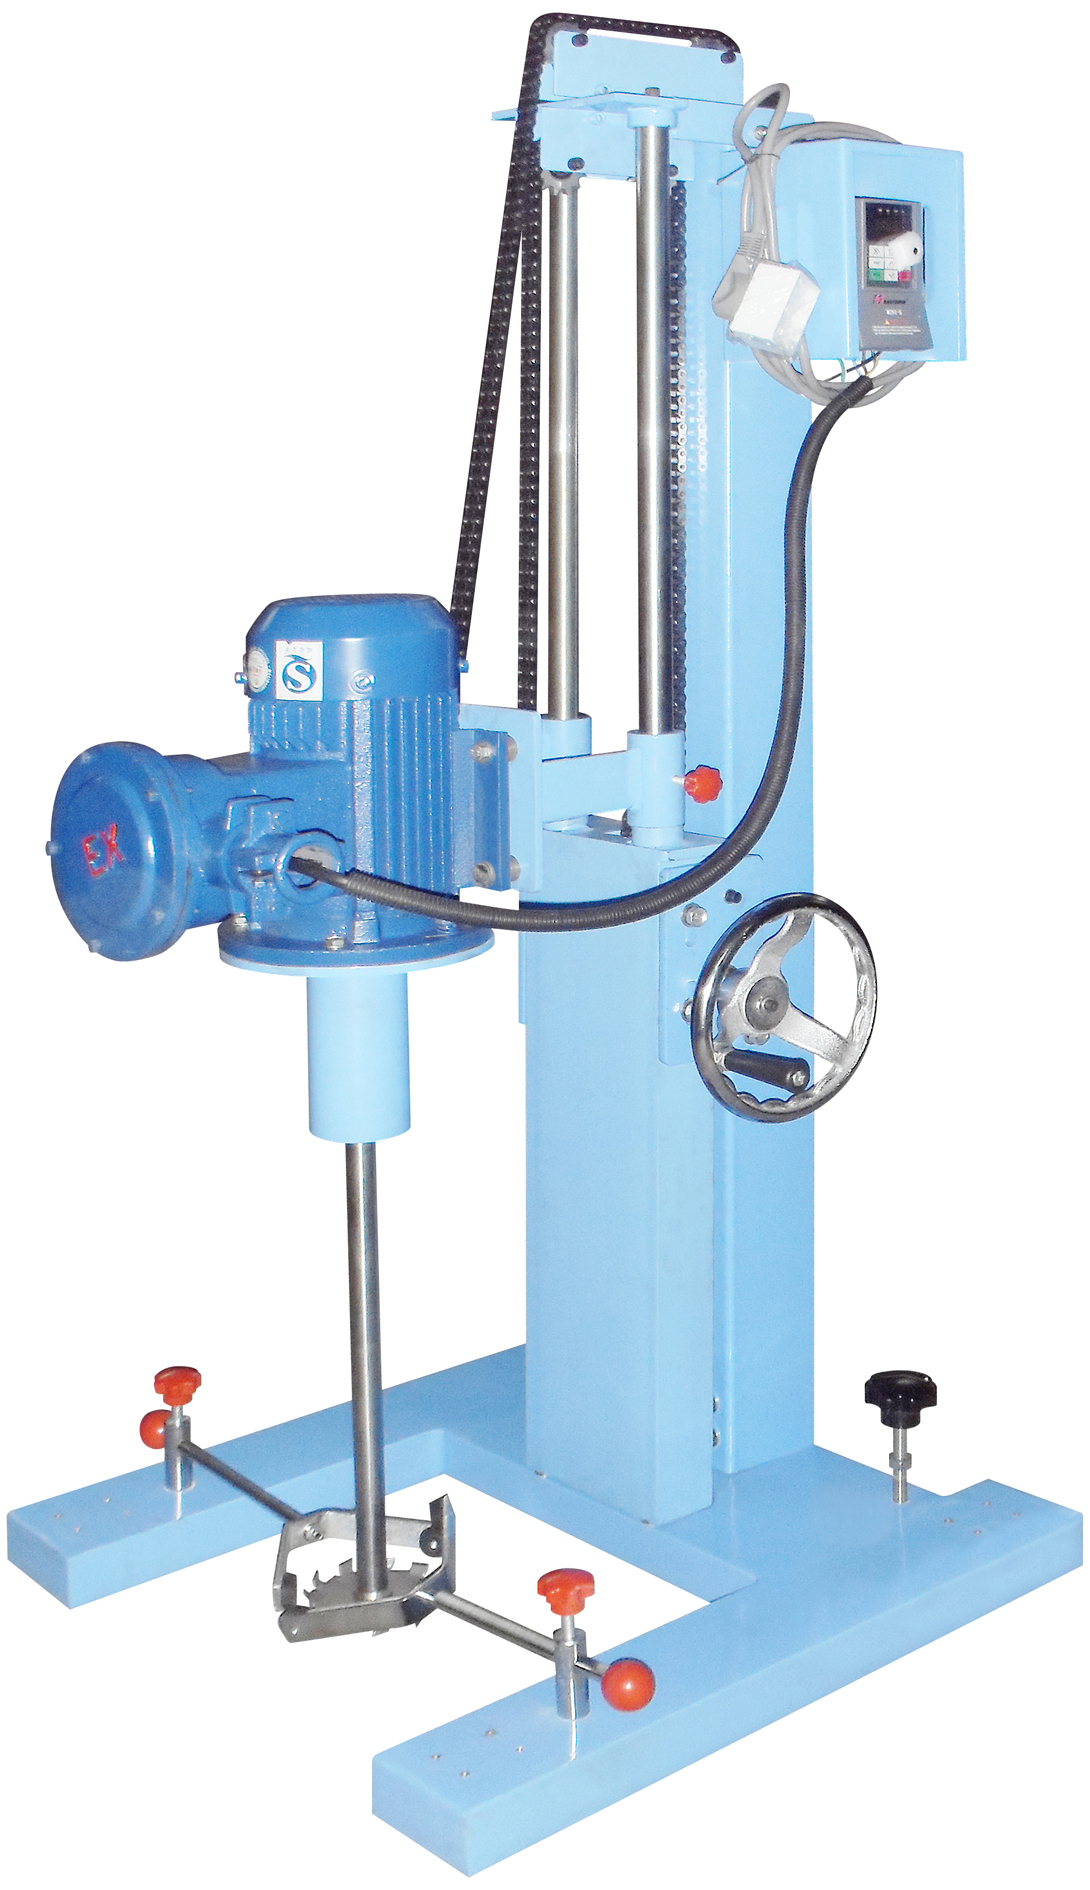 SDF-220 multifunctional grinding and dispersion machine